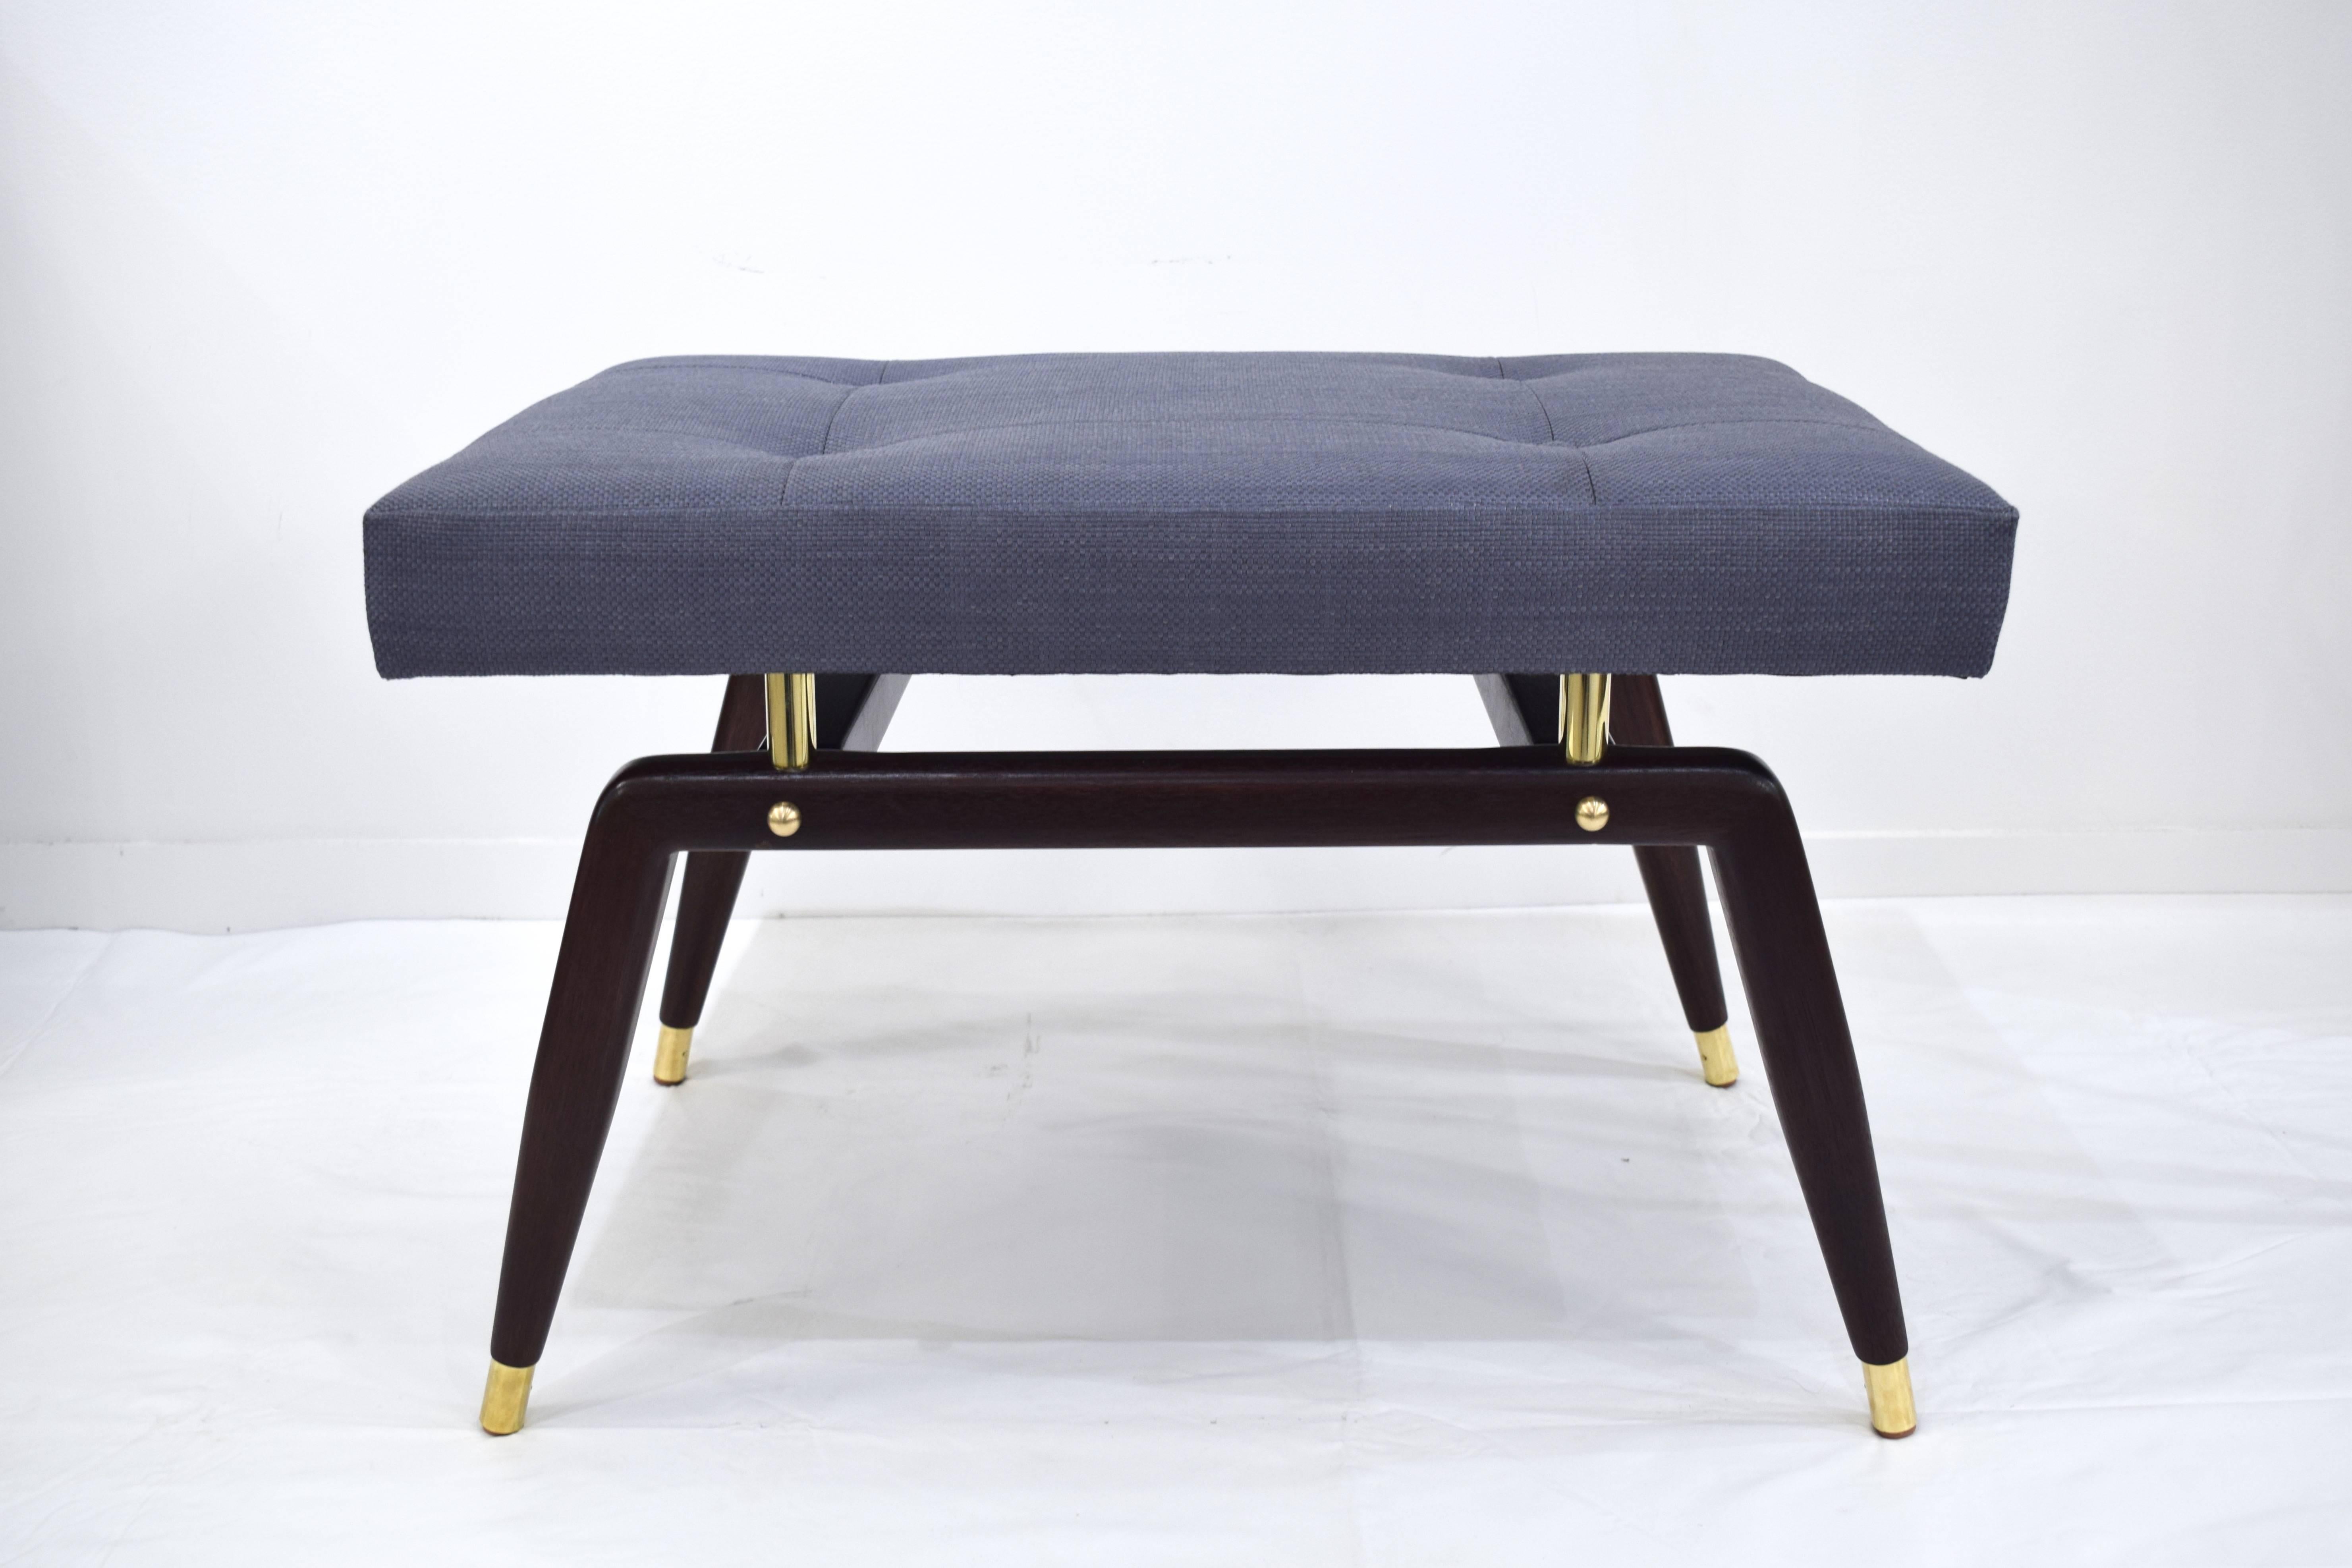 This elegantly appointed custom Formation ottoman is designed by Irwin Feld Design for CF Modern. Boasting clean and sculptural lines, the semi-gloss dark walnut base has custom brass sabots, risers and finials. Shown here in a Steel Blue Holly Hunt